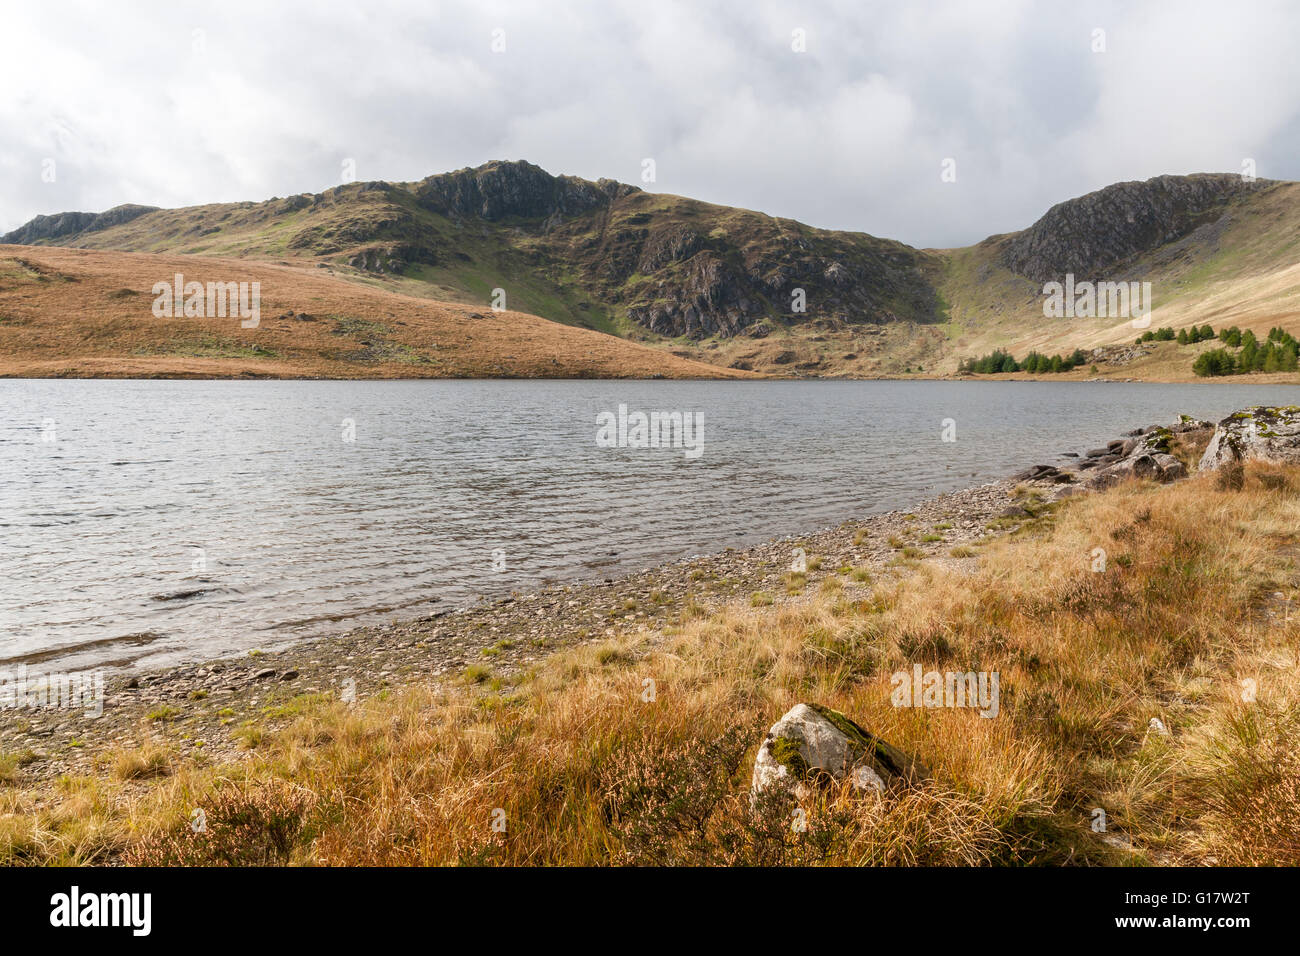 Llynnau Diwaunydd or the lower lake a mountain lake formed by glacial overdeepening on the outskirts of Blaenau Ffestiniog Stock Photo